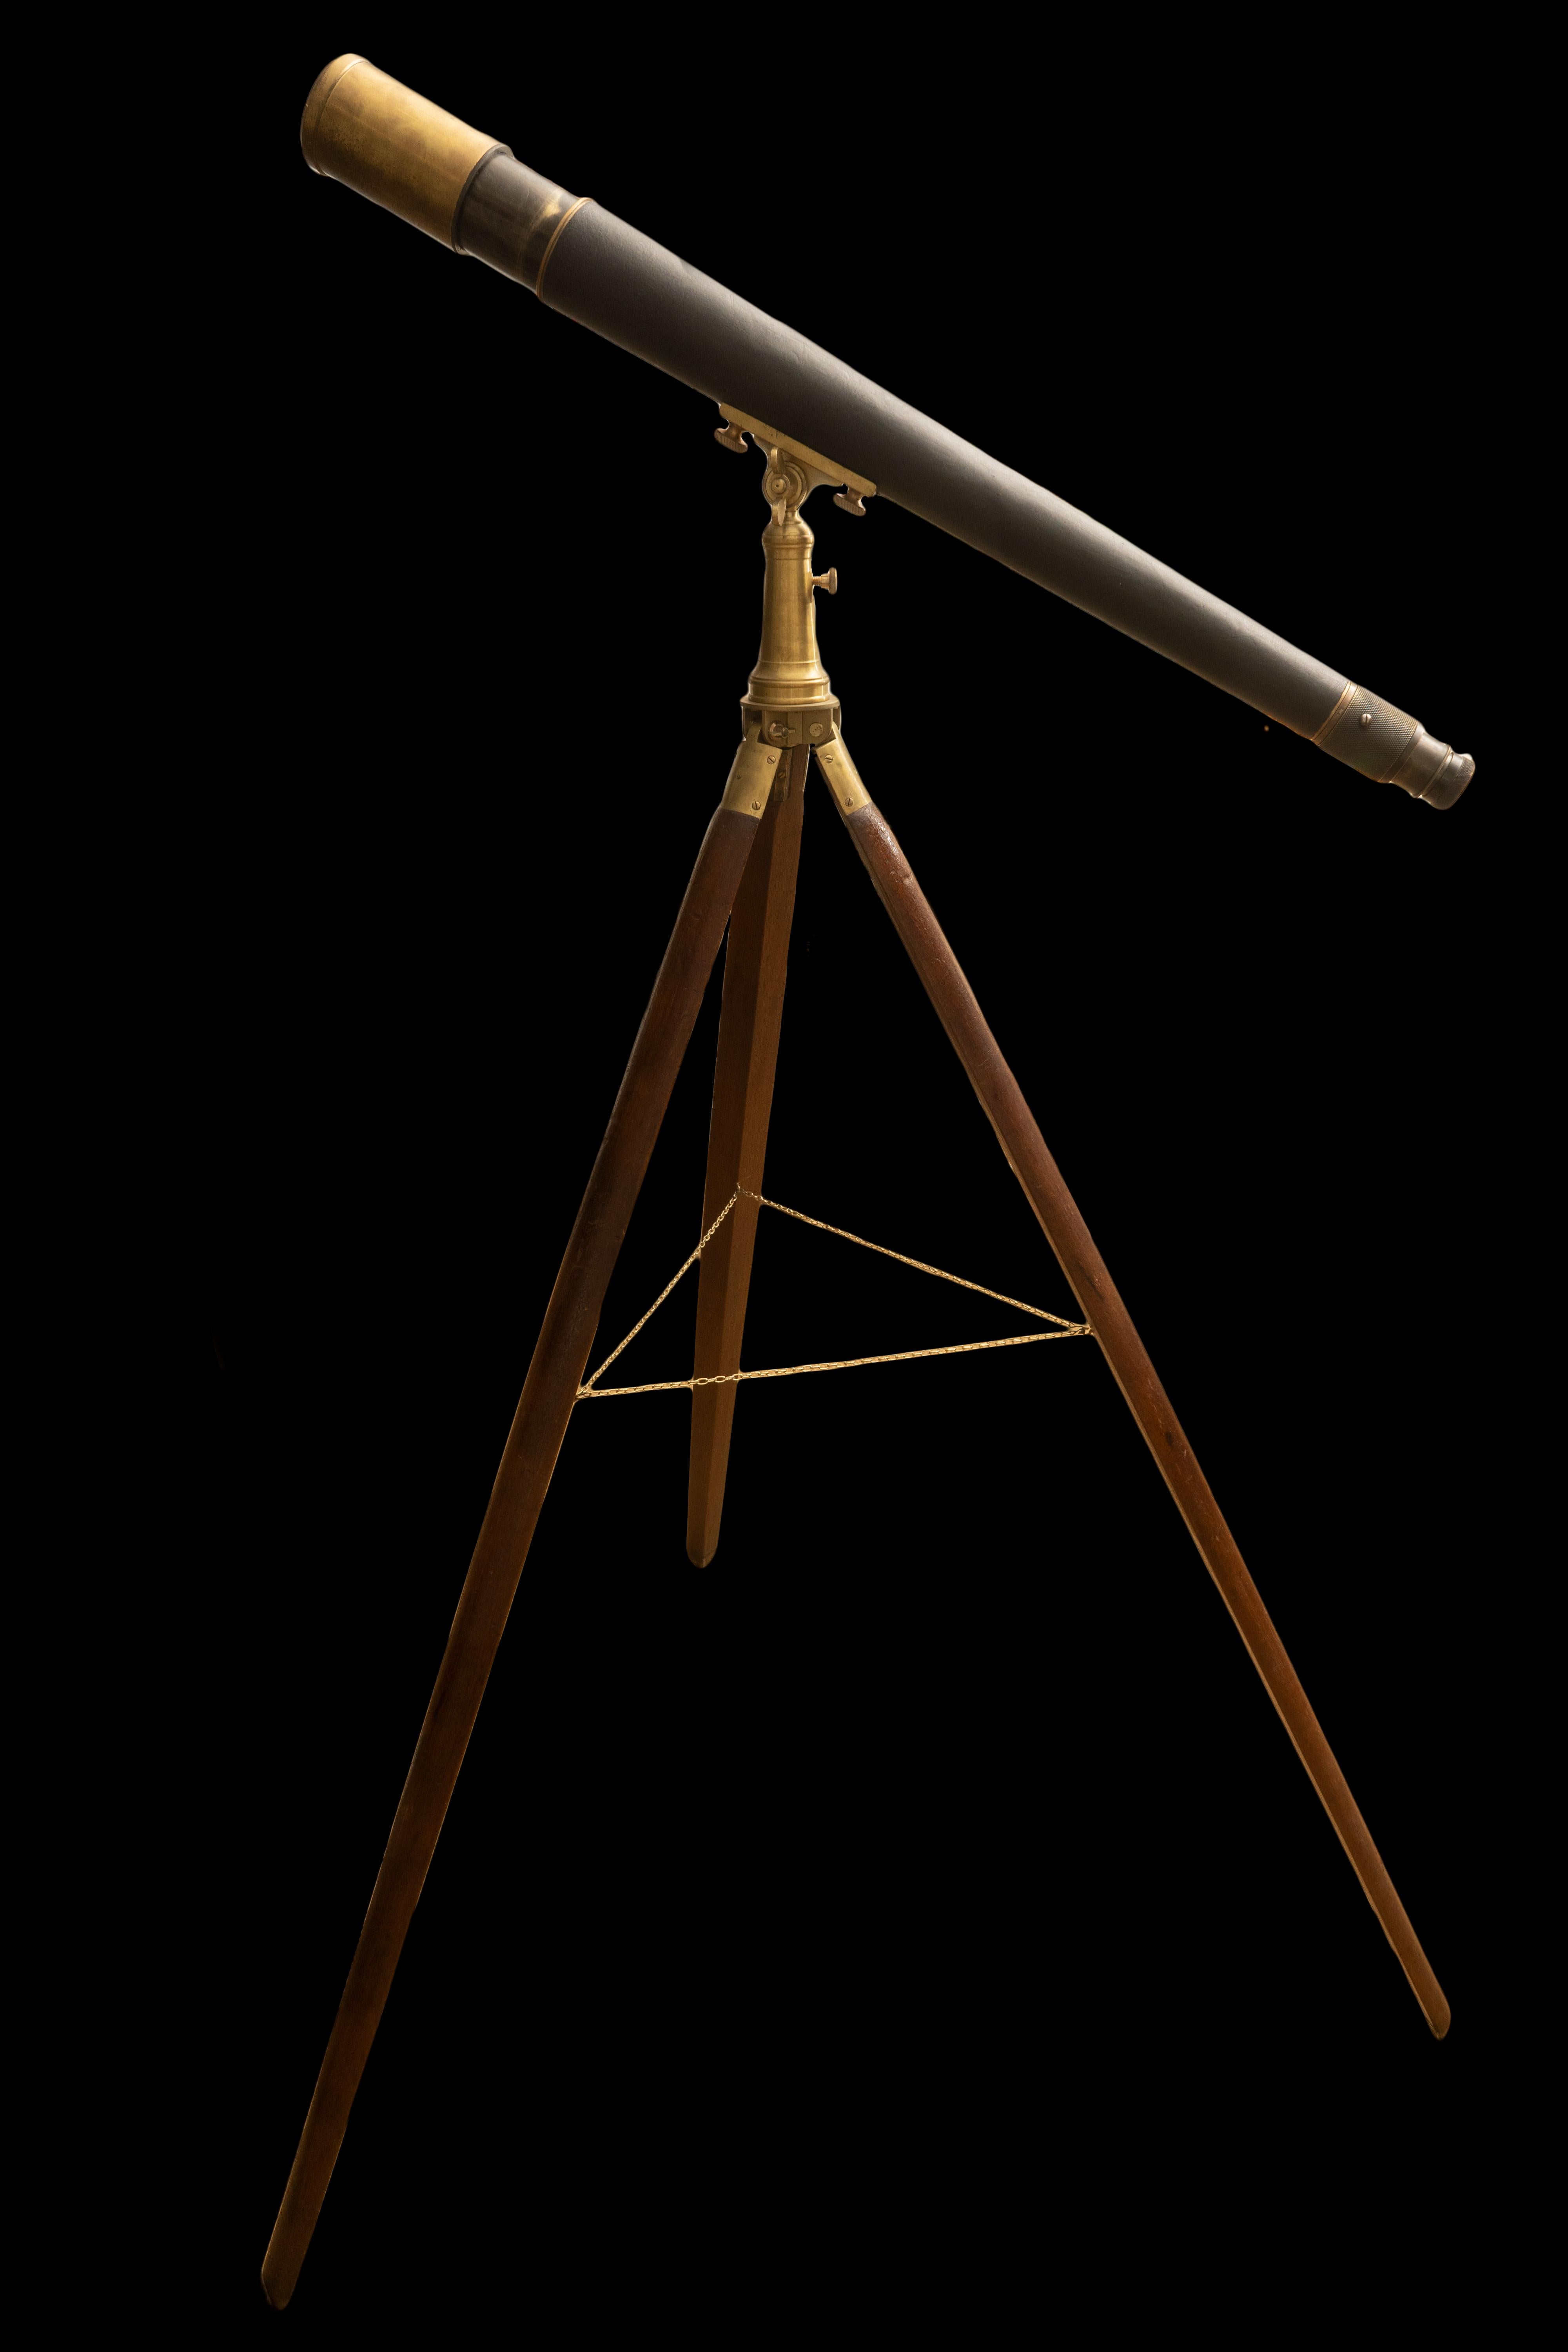 W. Ottway Telescope from World War II:

W. Ottway single-draw WWII Military sighting telescope, having black leather wrapped barrel, with ''PATT. 333.A., W. Ottway & Co. Ltd., Ealing. London., 1945, No. 2114'' mark to eye piece and other assembled